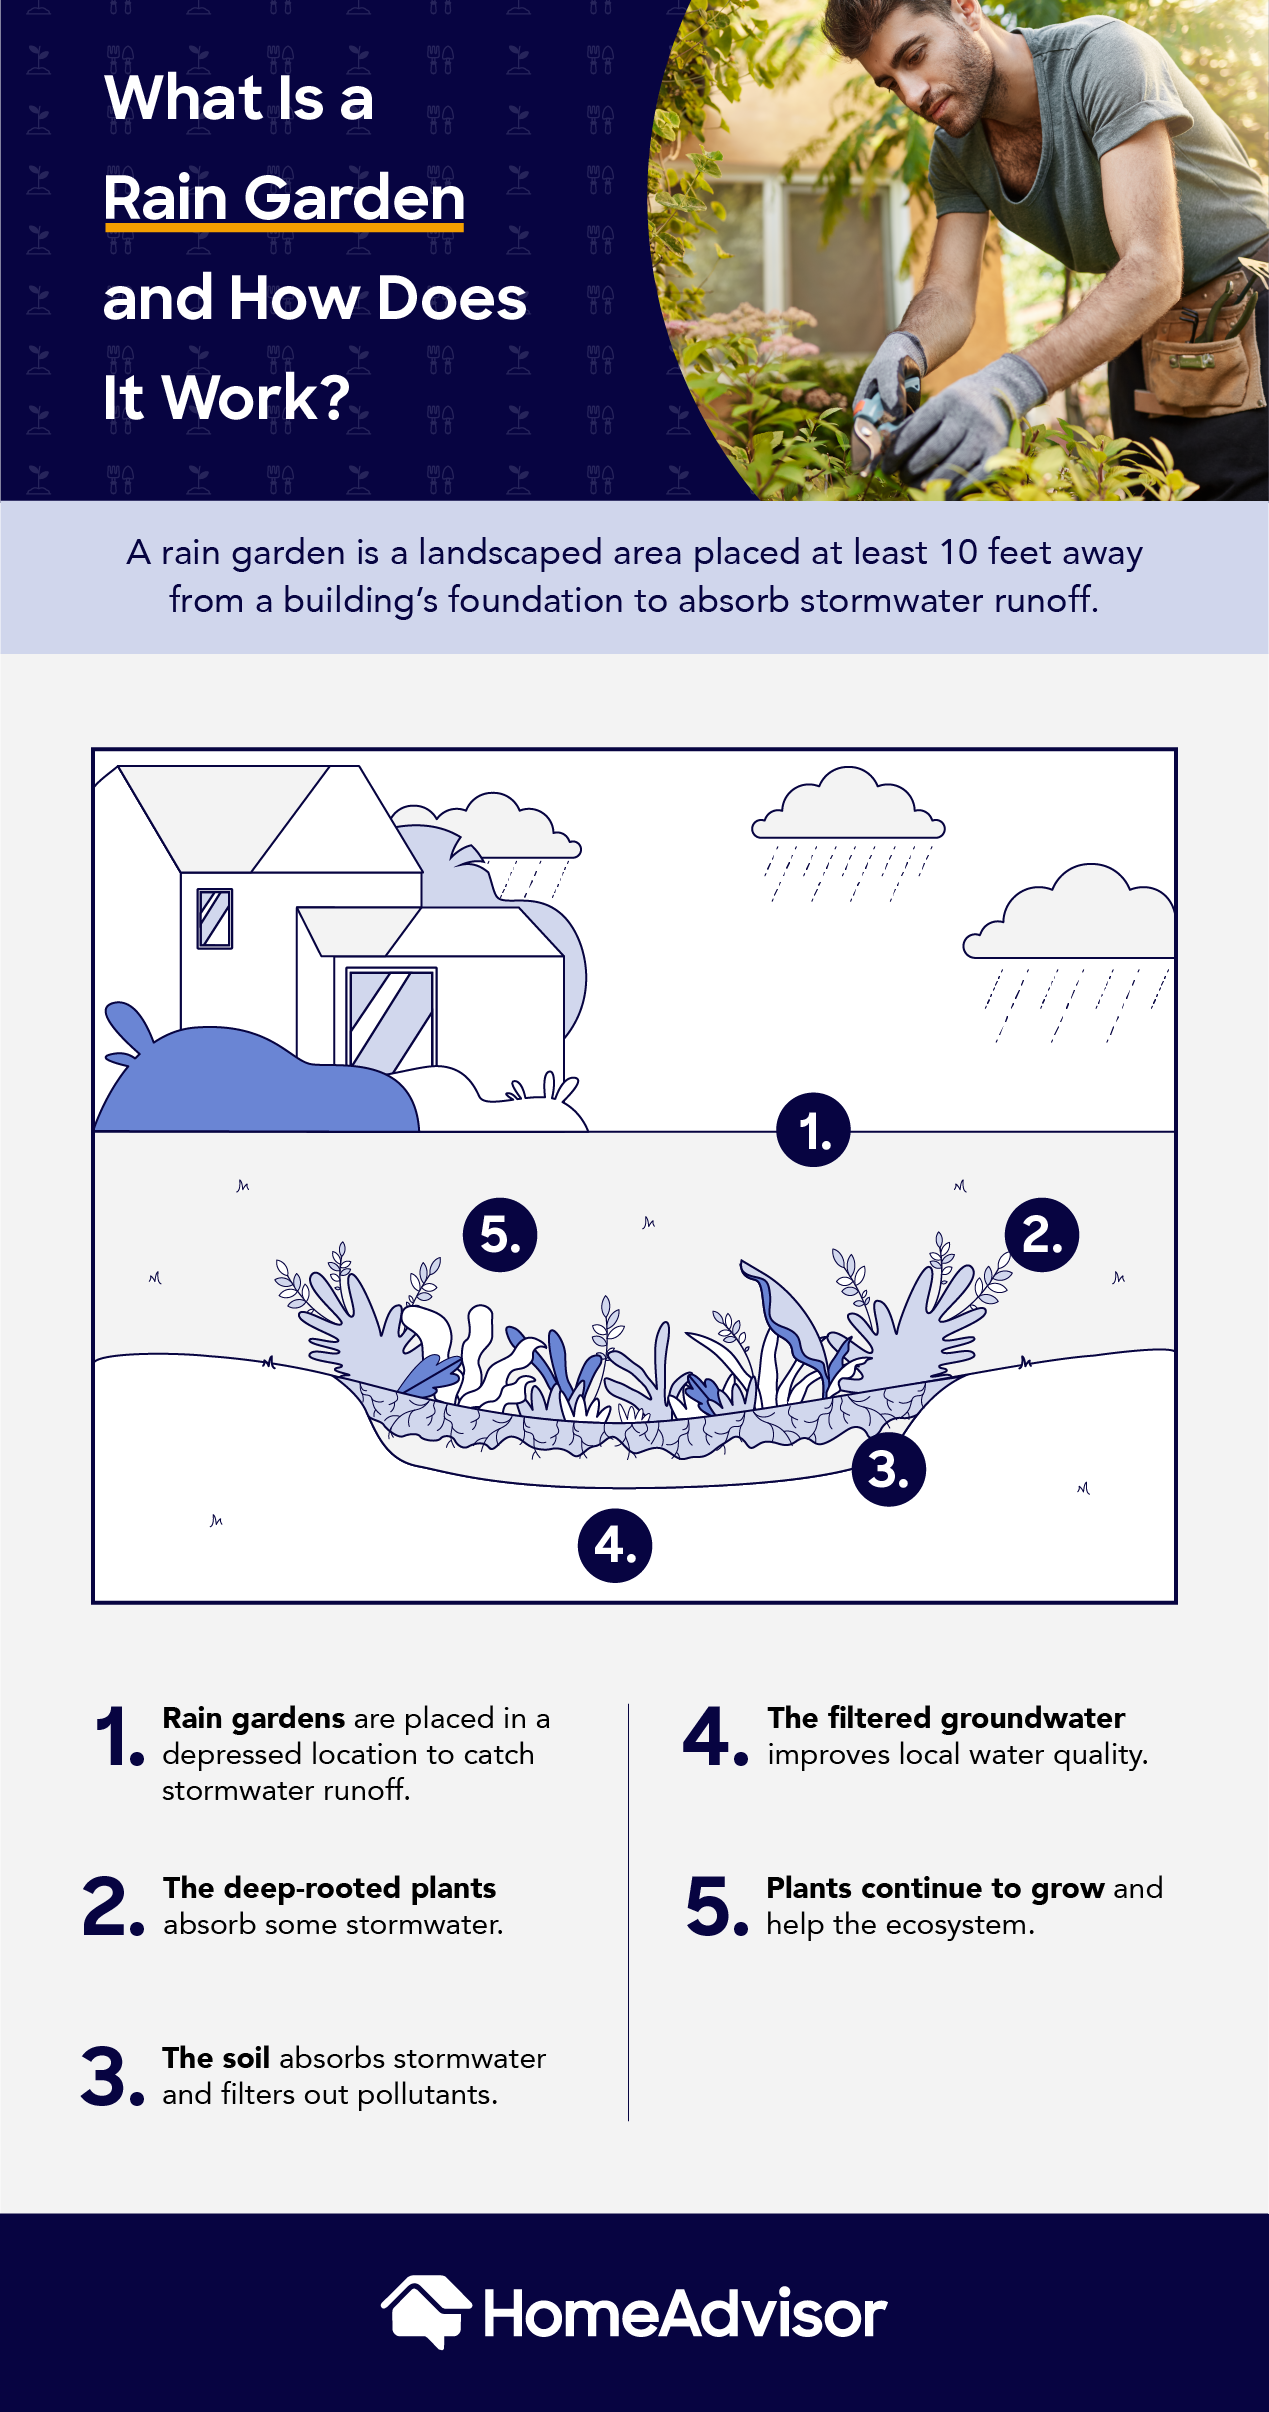 what is a rain garden and how does it work?